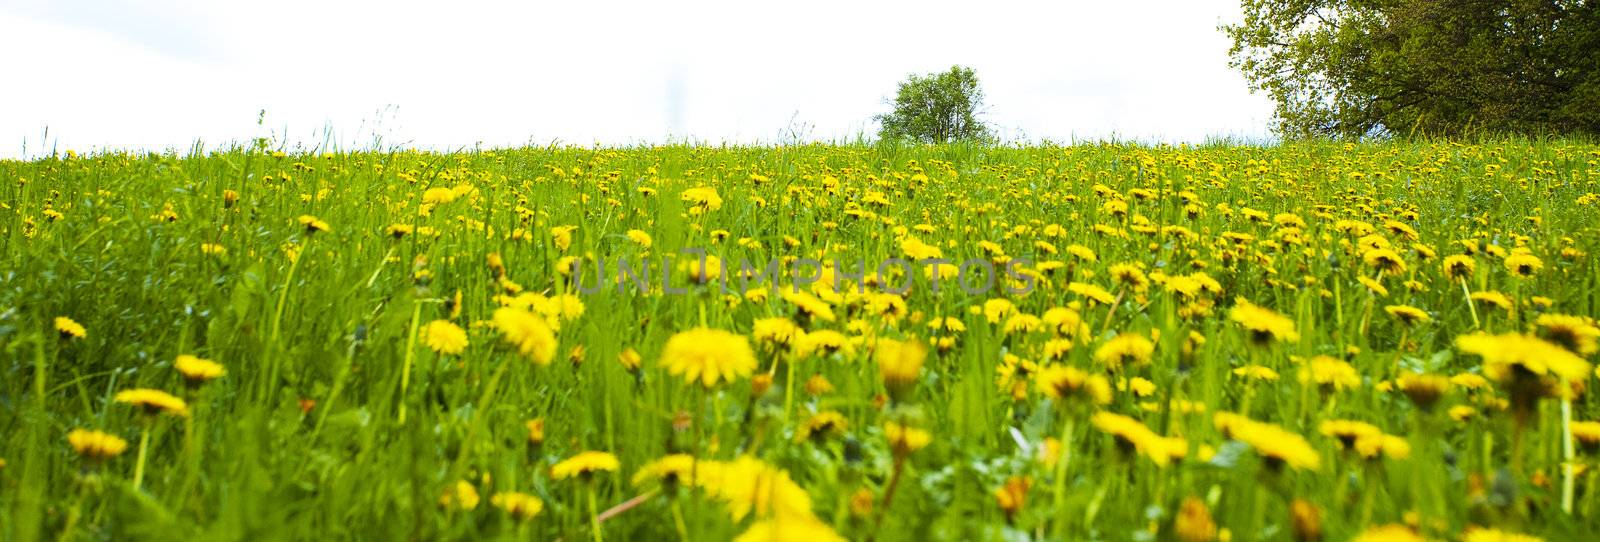 background field of dandelions in the woods